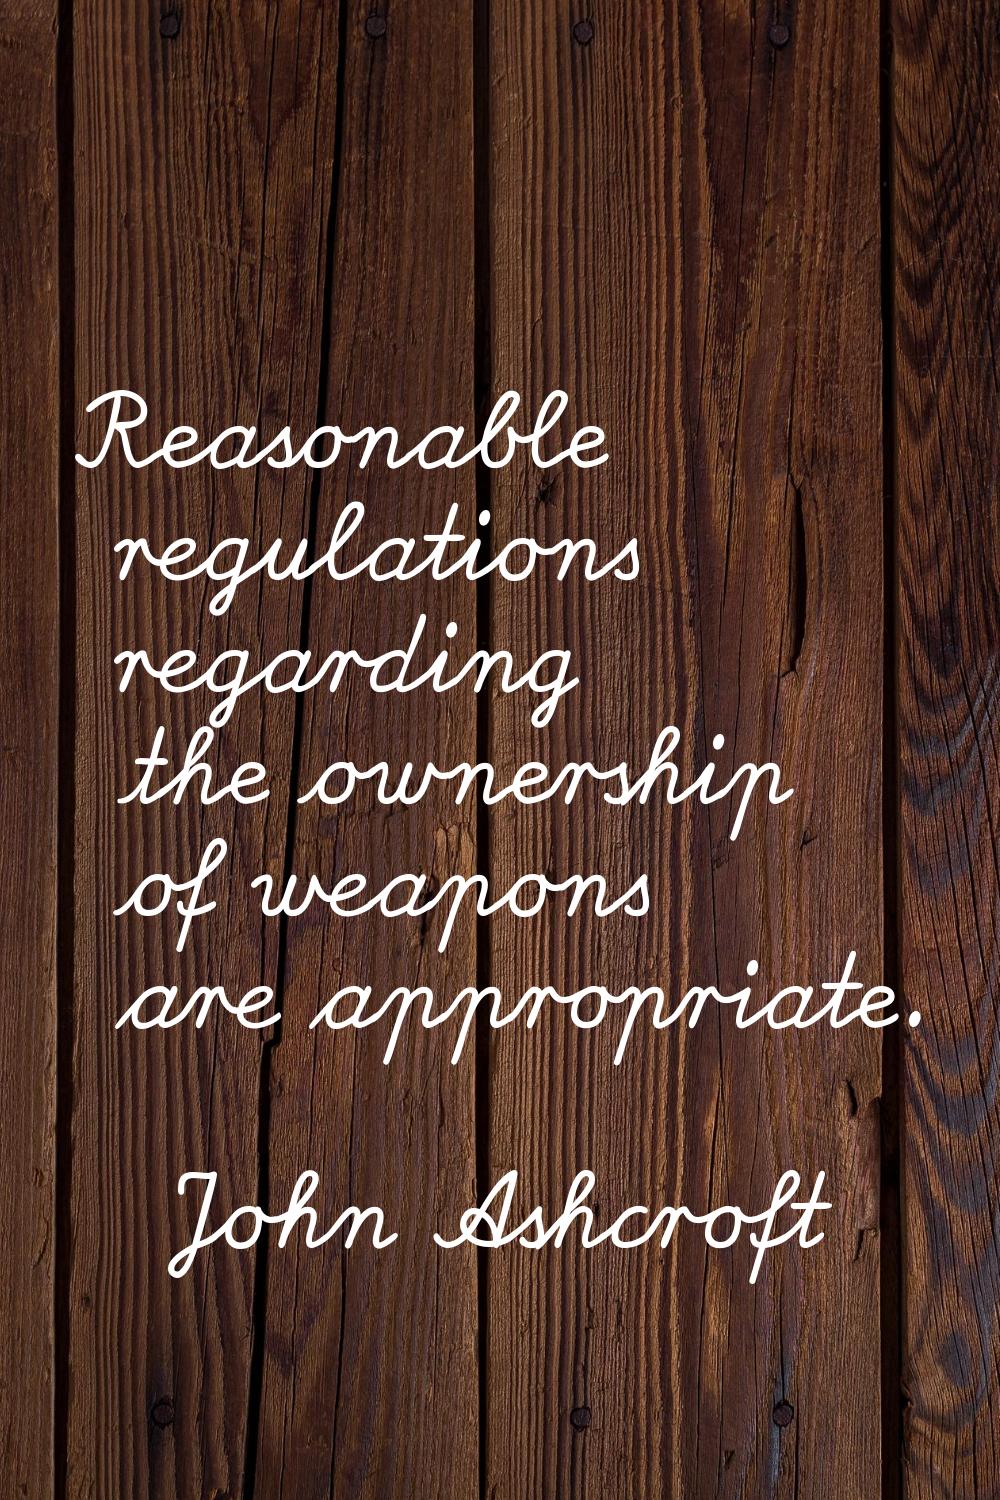 Reasonable regulations regarding the ownership of weapons are appropriate.